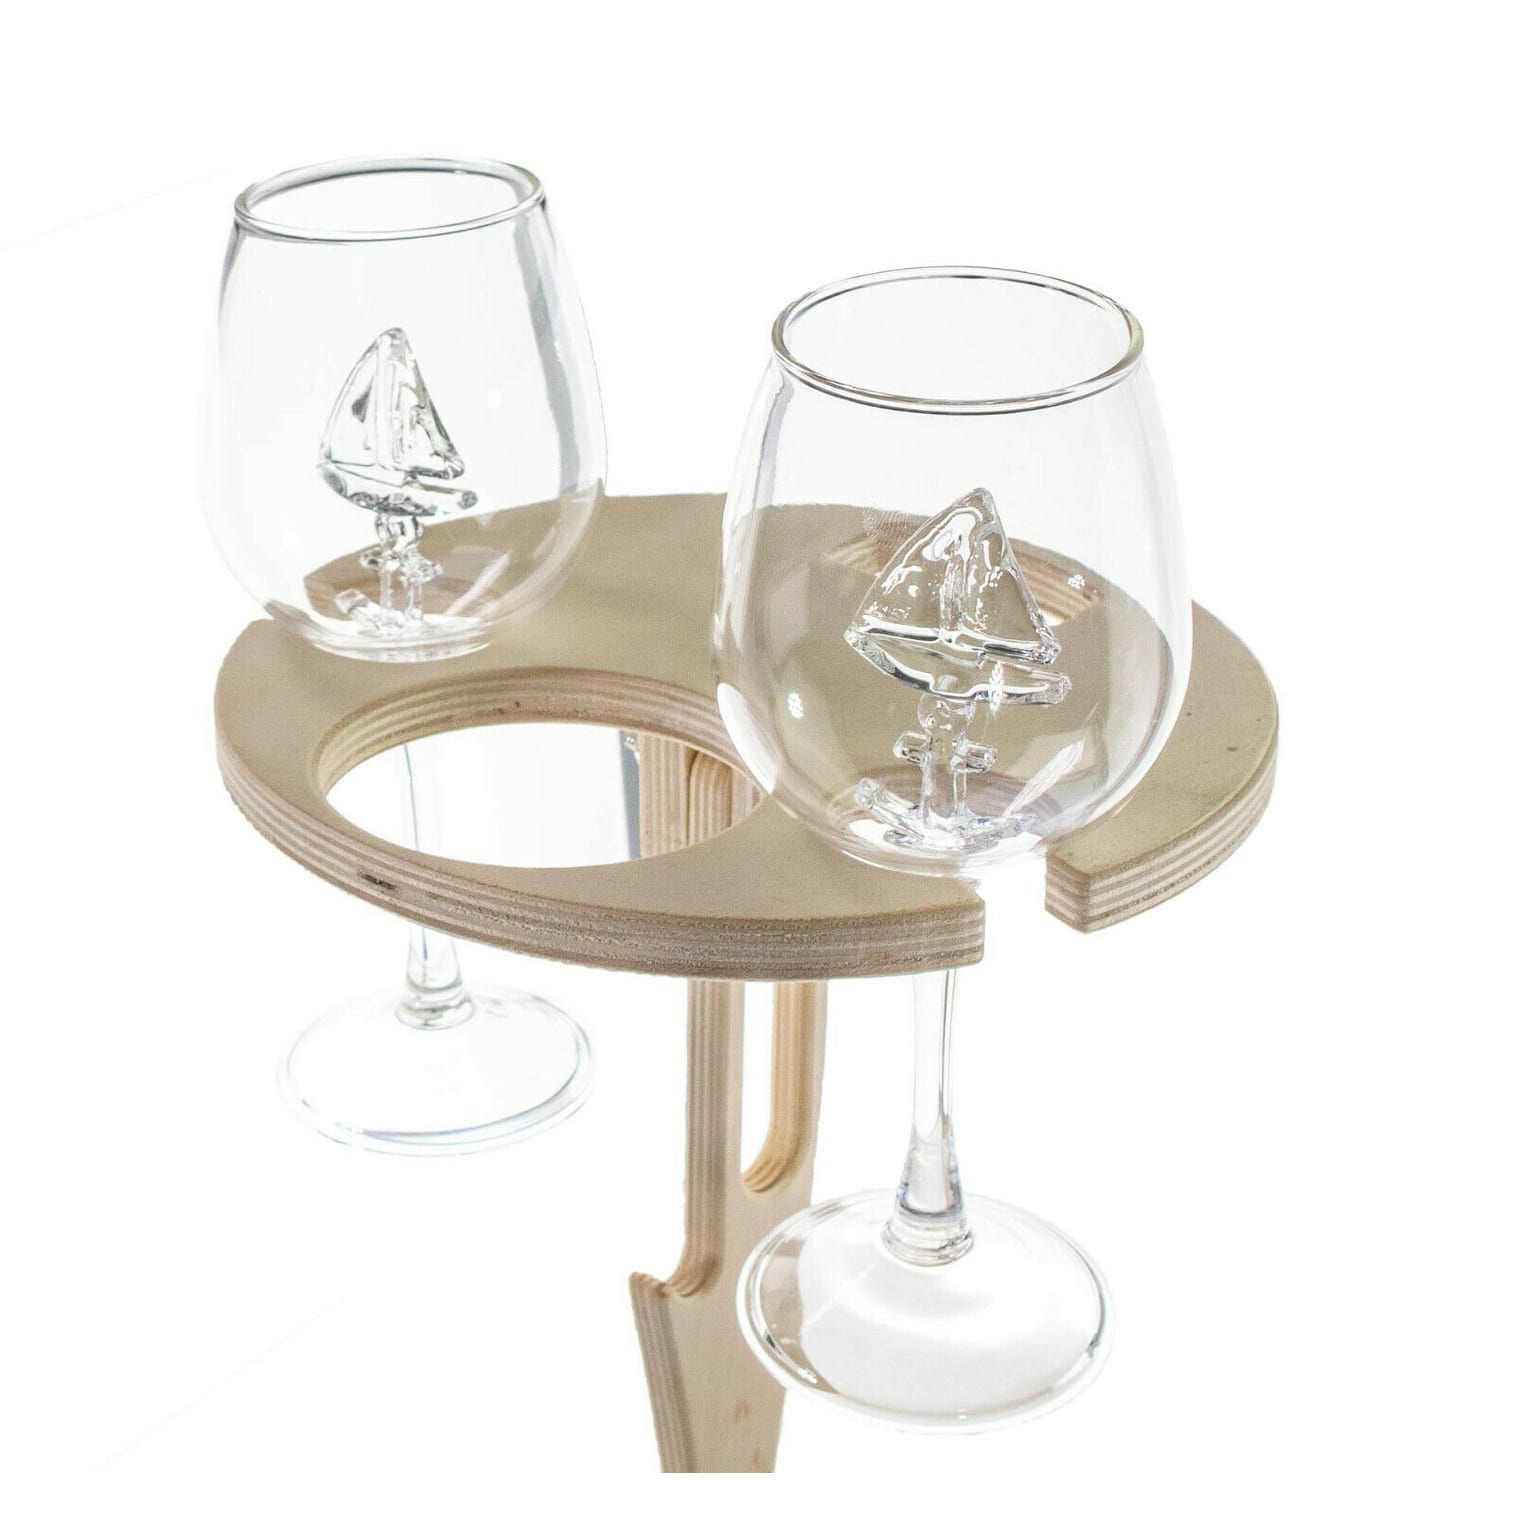 Portable Outdoor Wine Table With Bottle Holder - Foldable Mini Wooden ...